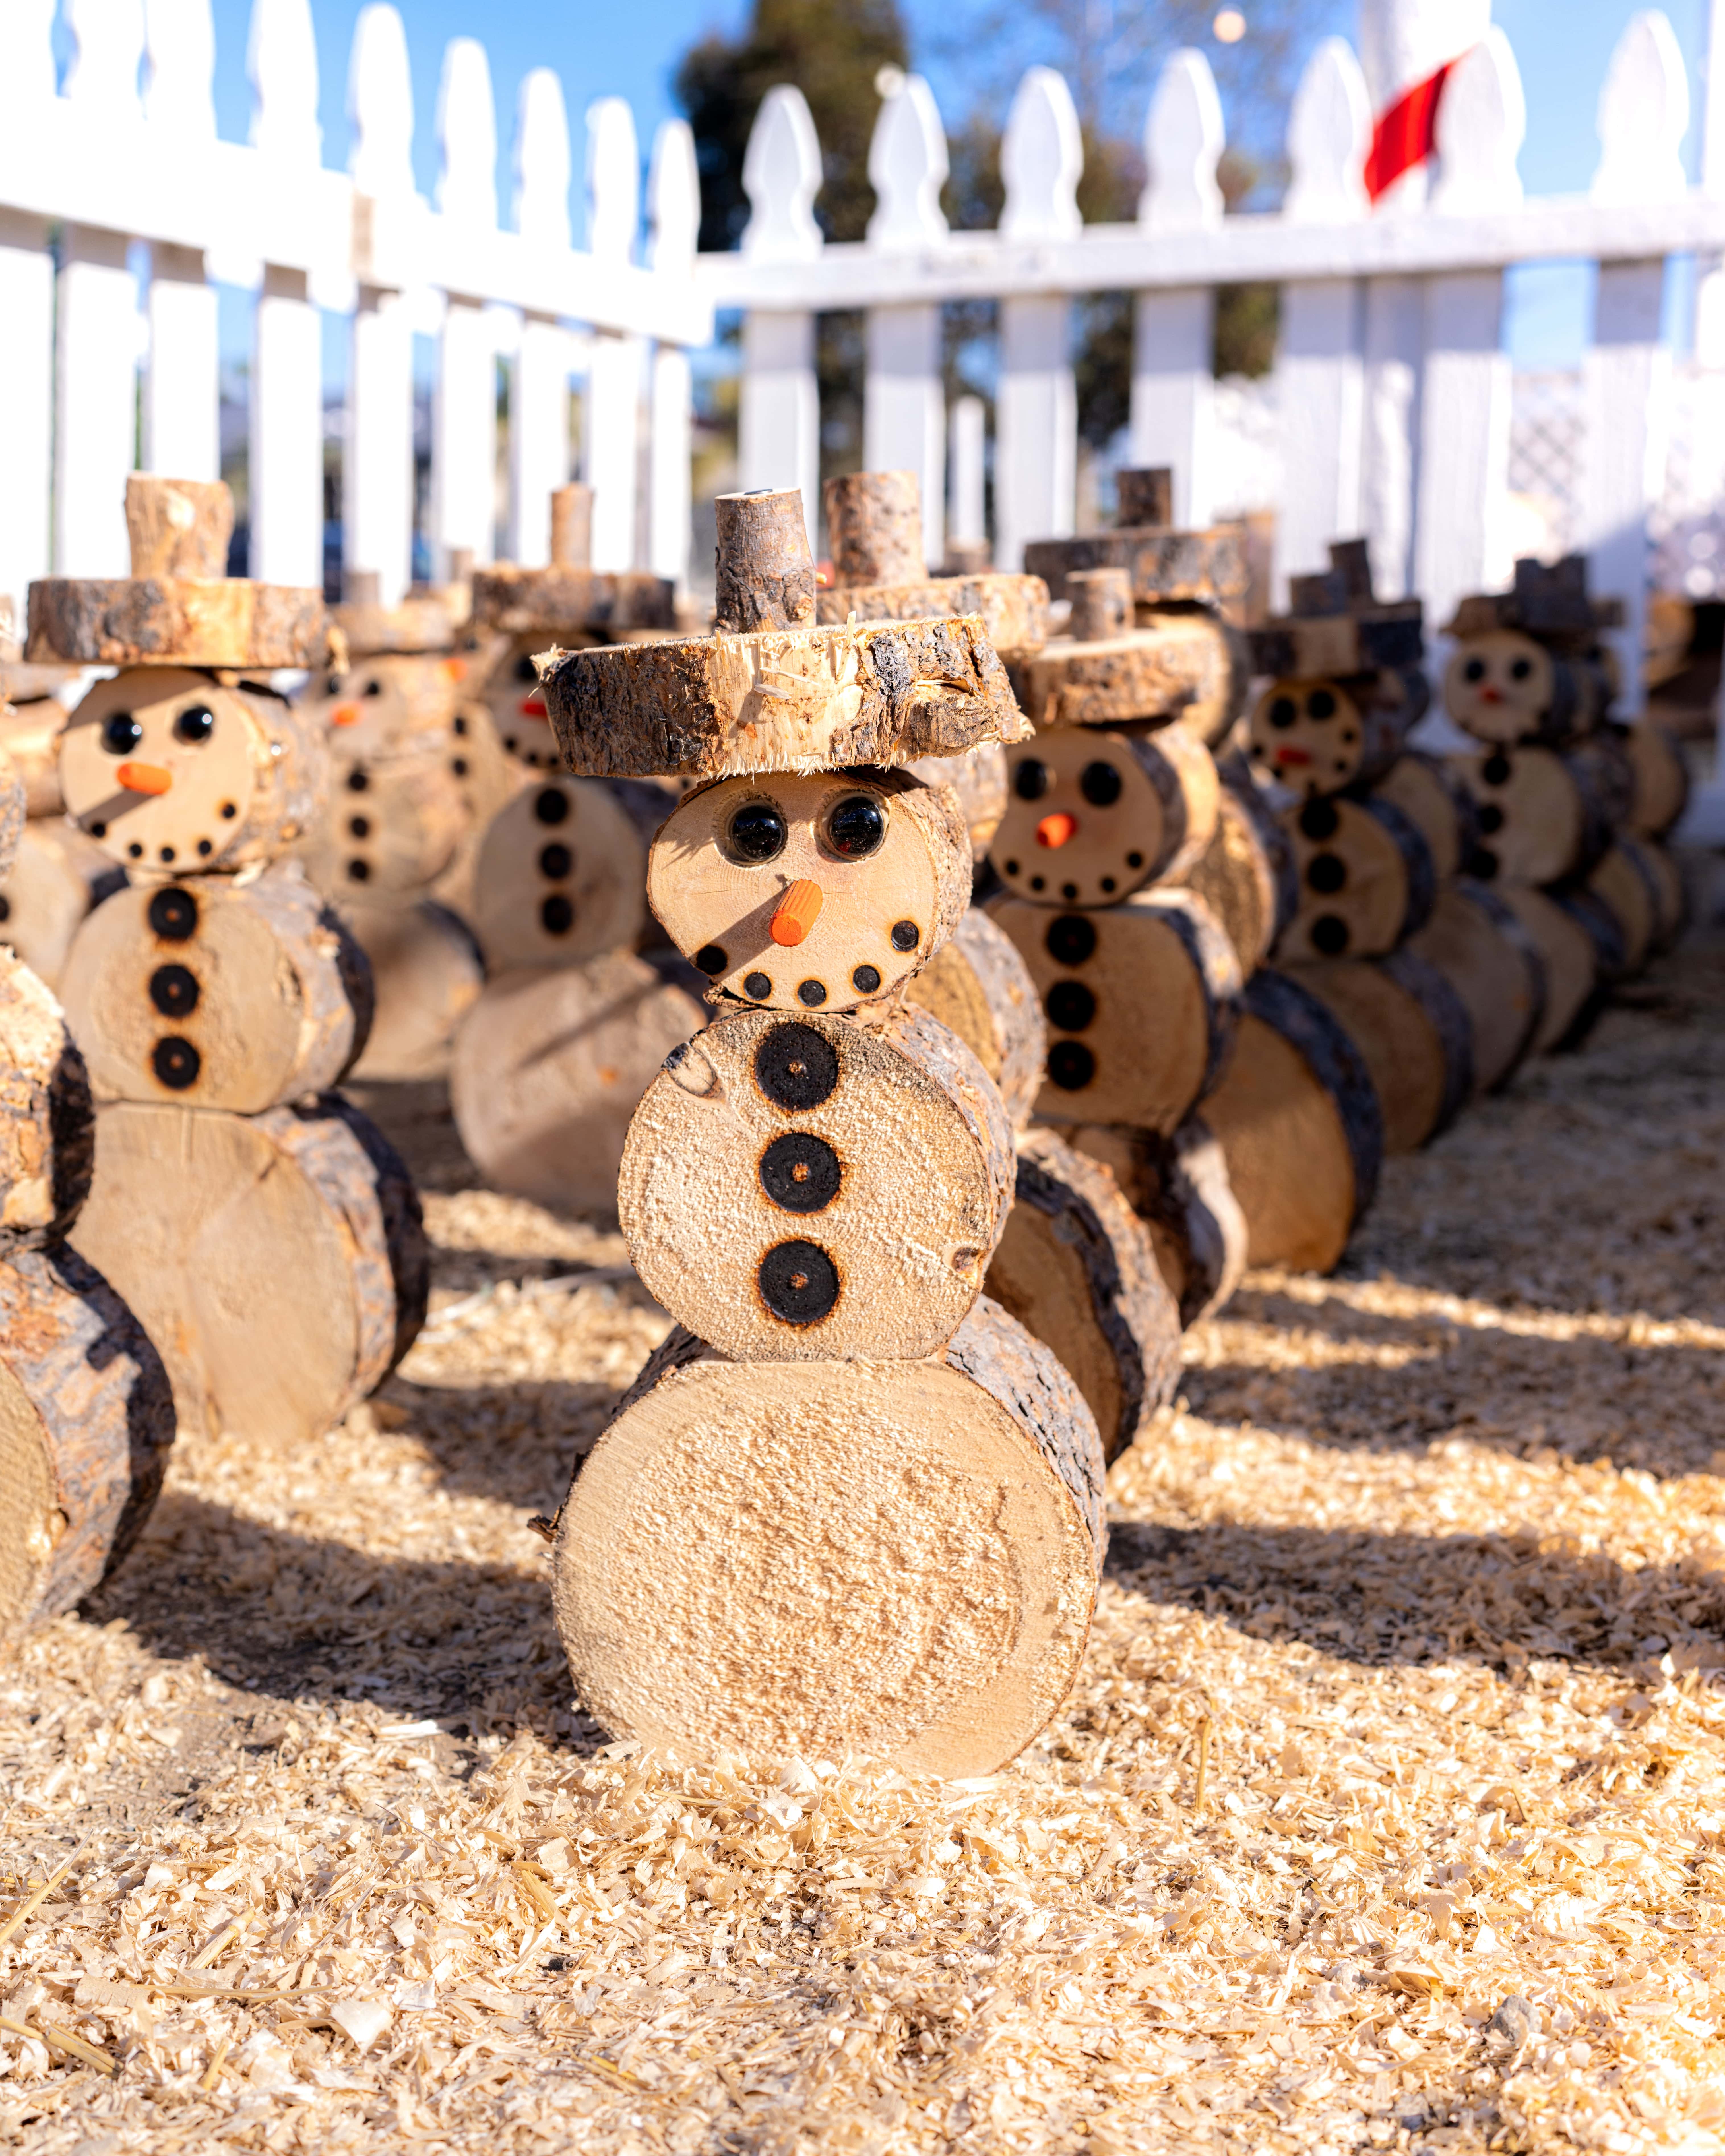 image of snowman made of wood